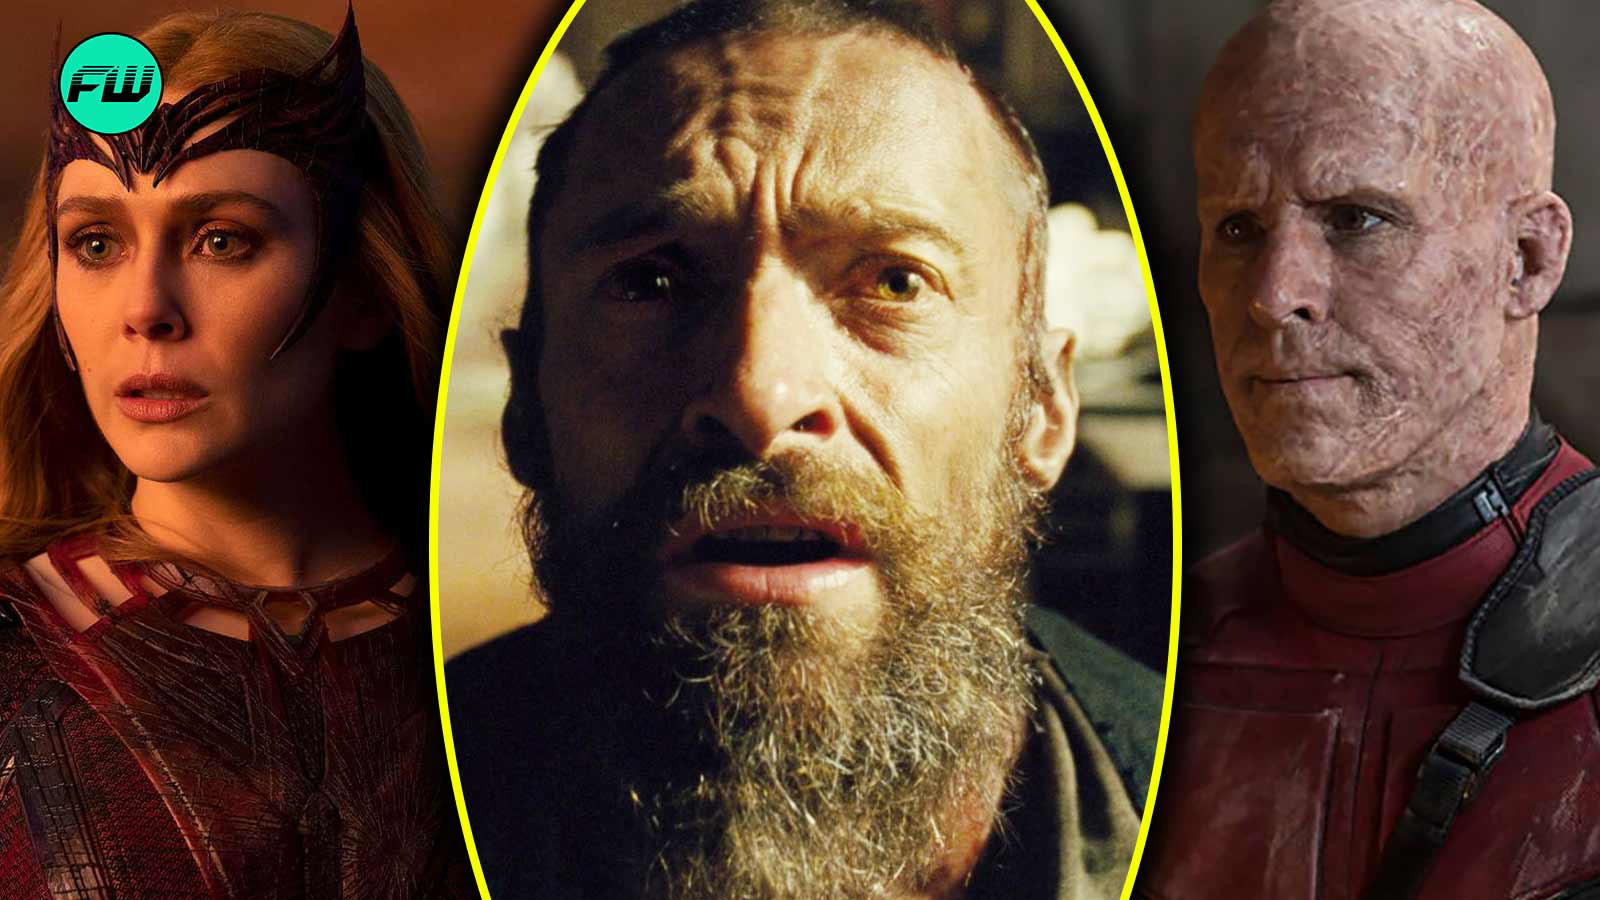 Elizabeth Olsen, How Did You Do It – Hugh Jackman Cries More Than He Did in Les Misérables as He Screams in Pain Doing Hot Ones With Ryan Reynolds